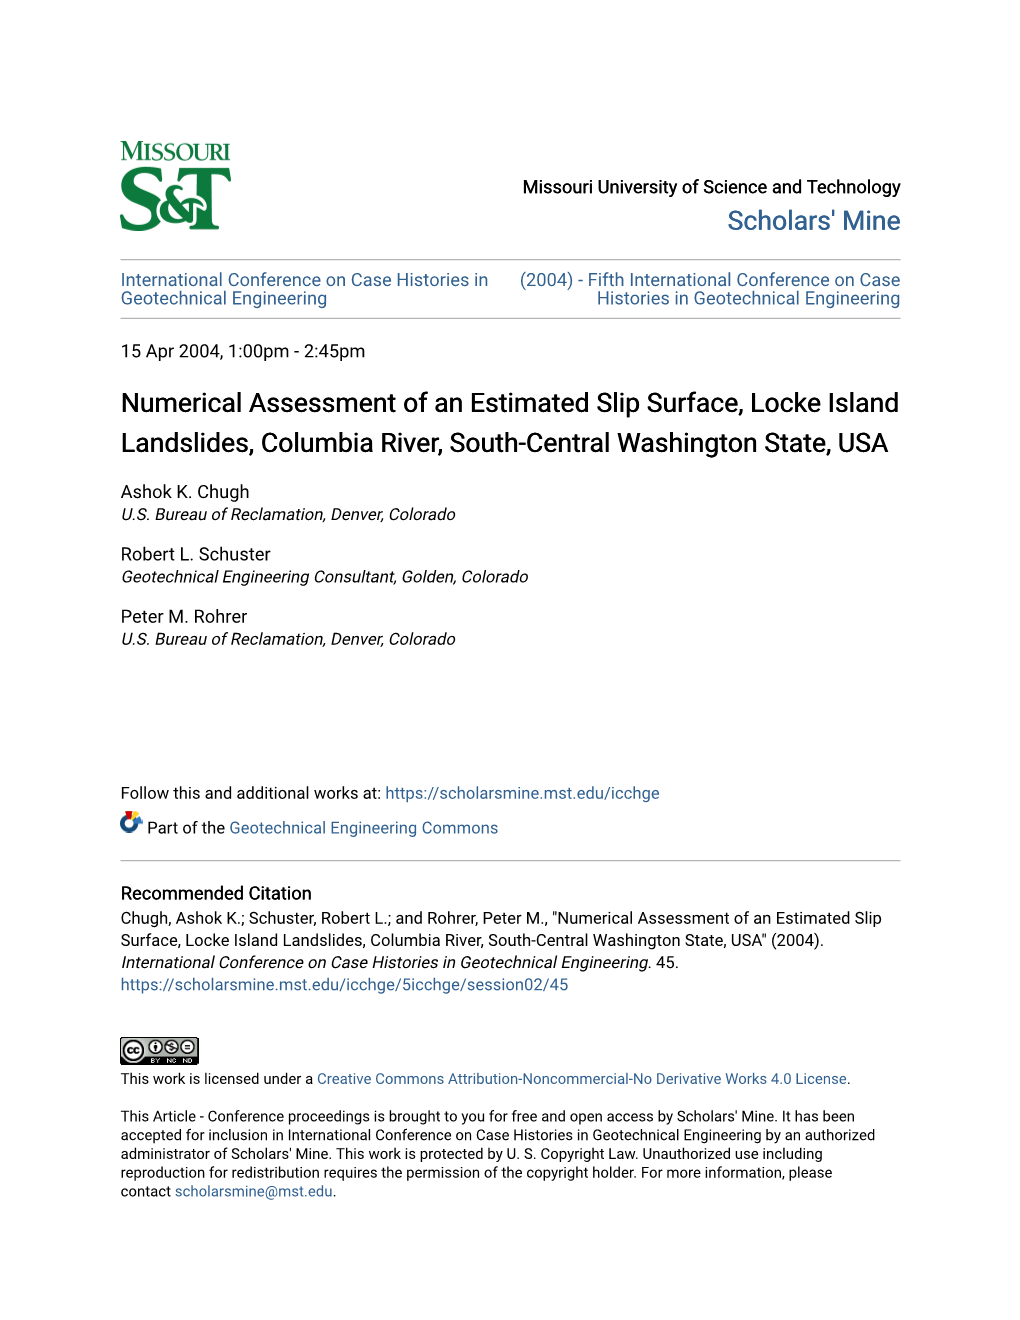 Numerical Assessment of an Estimated Slip Surface, Locke Island Landslides, Columbia River, South-Central Washington State, USA